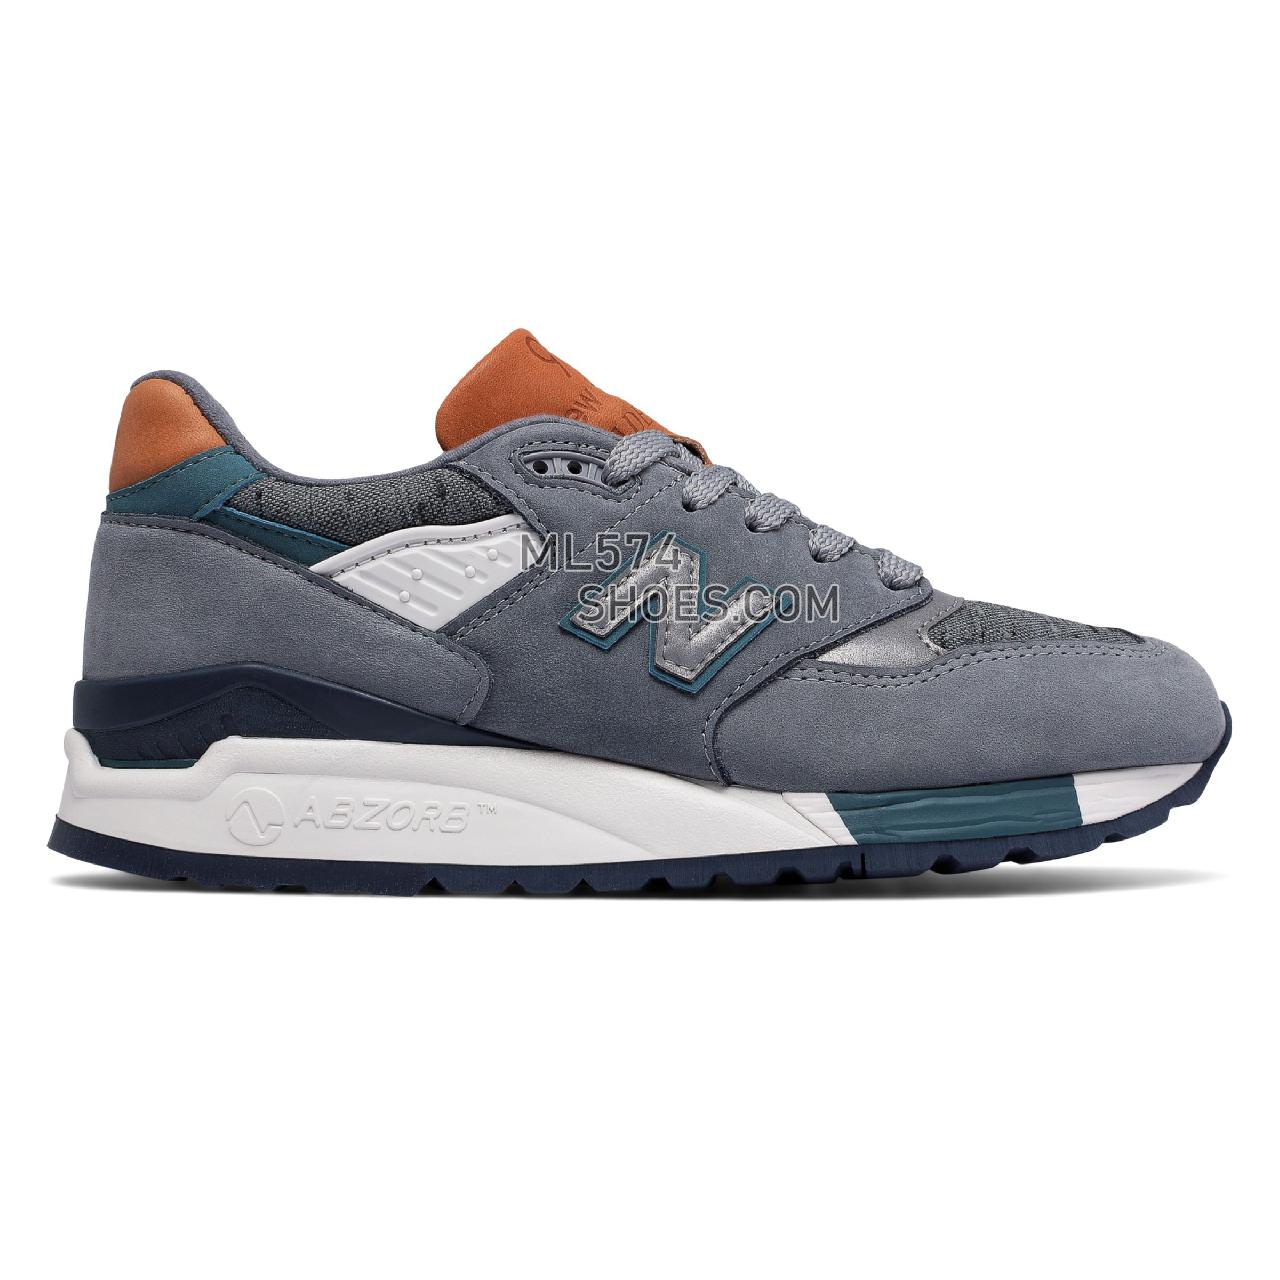 New Balance Made in US 998 - Men's 998 Made In USA - Classic - Steel with Typhoon - W998DTV